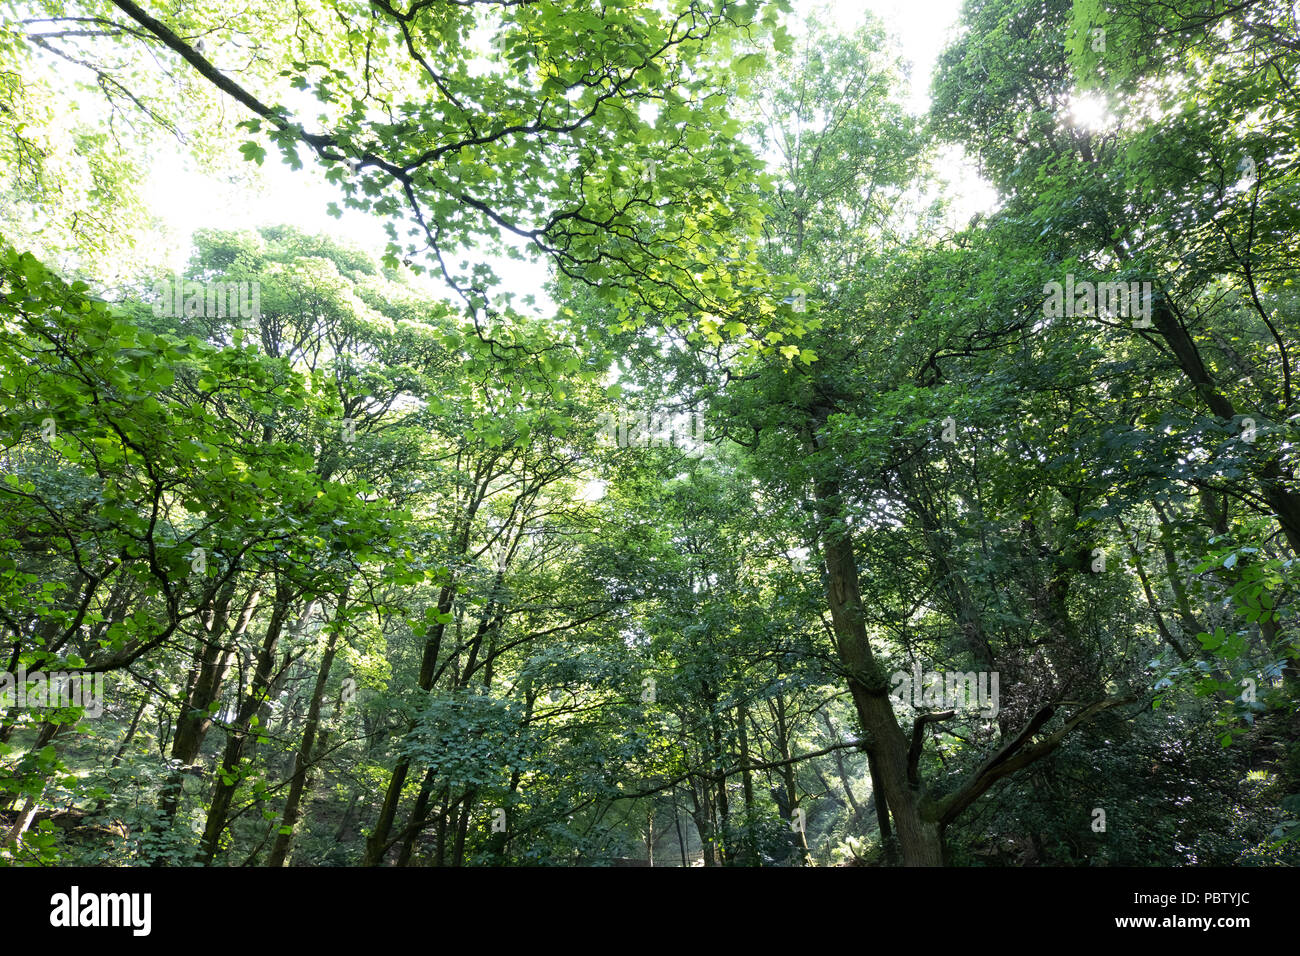 Strong atmospheric concept images taken against a strong sun filtering through the trees with distinct sun rays lighting the trees and woodlands Stock Photo